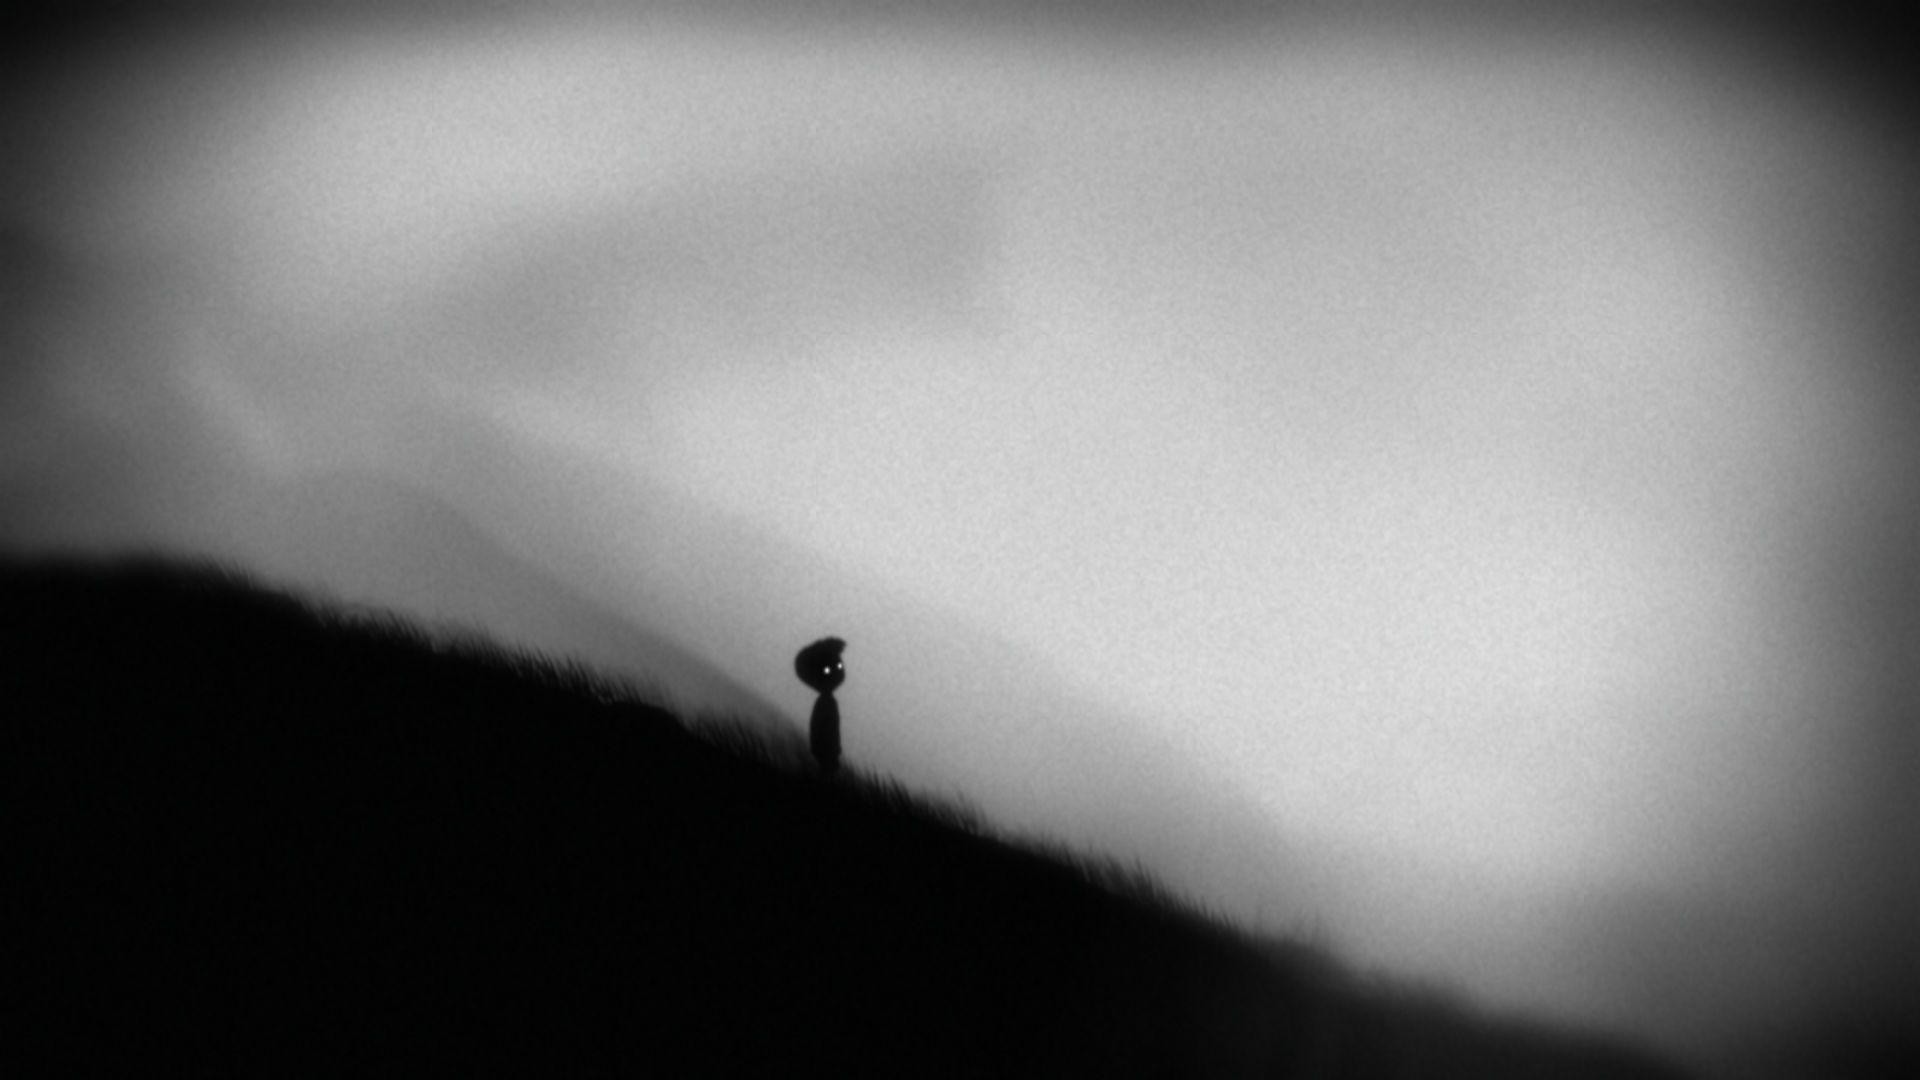 1920x1080 Limbo Wallpapers for download - iPhone, iOS & Android Games Wallpapers